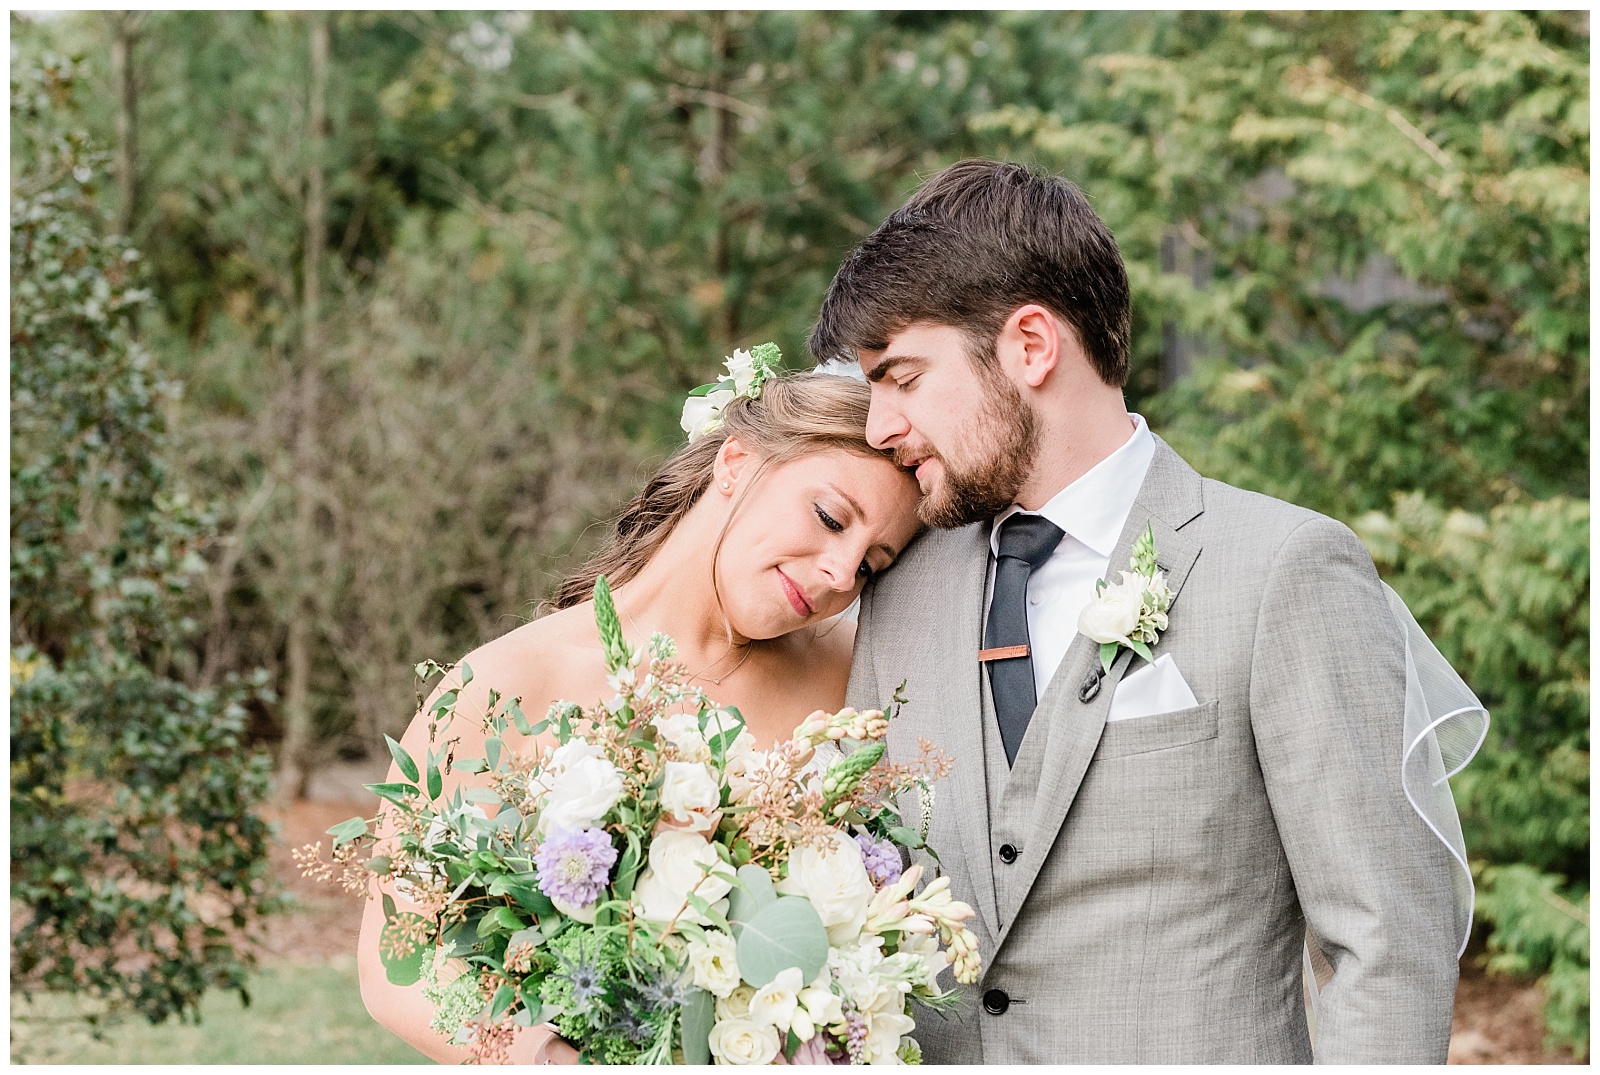 Bride resting her head on the groom's shoulder while holding a wild flower bouquet.